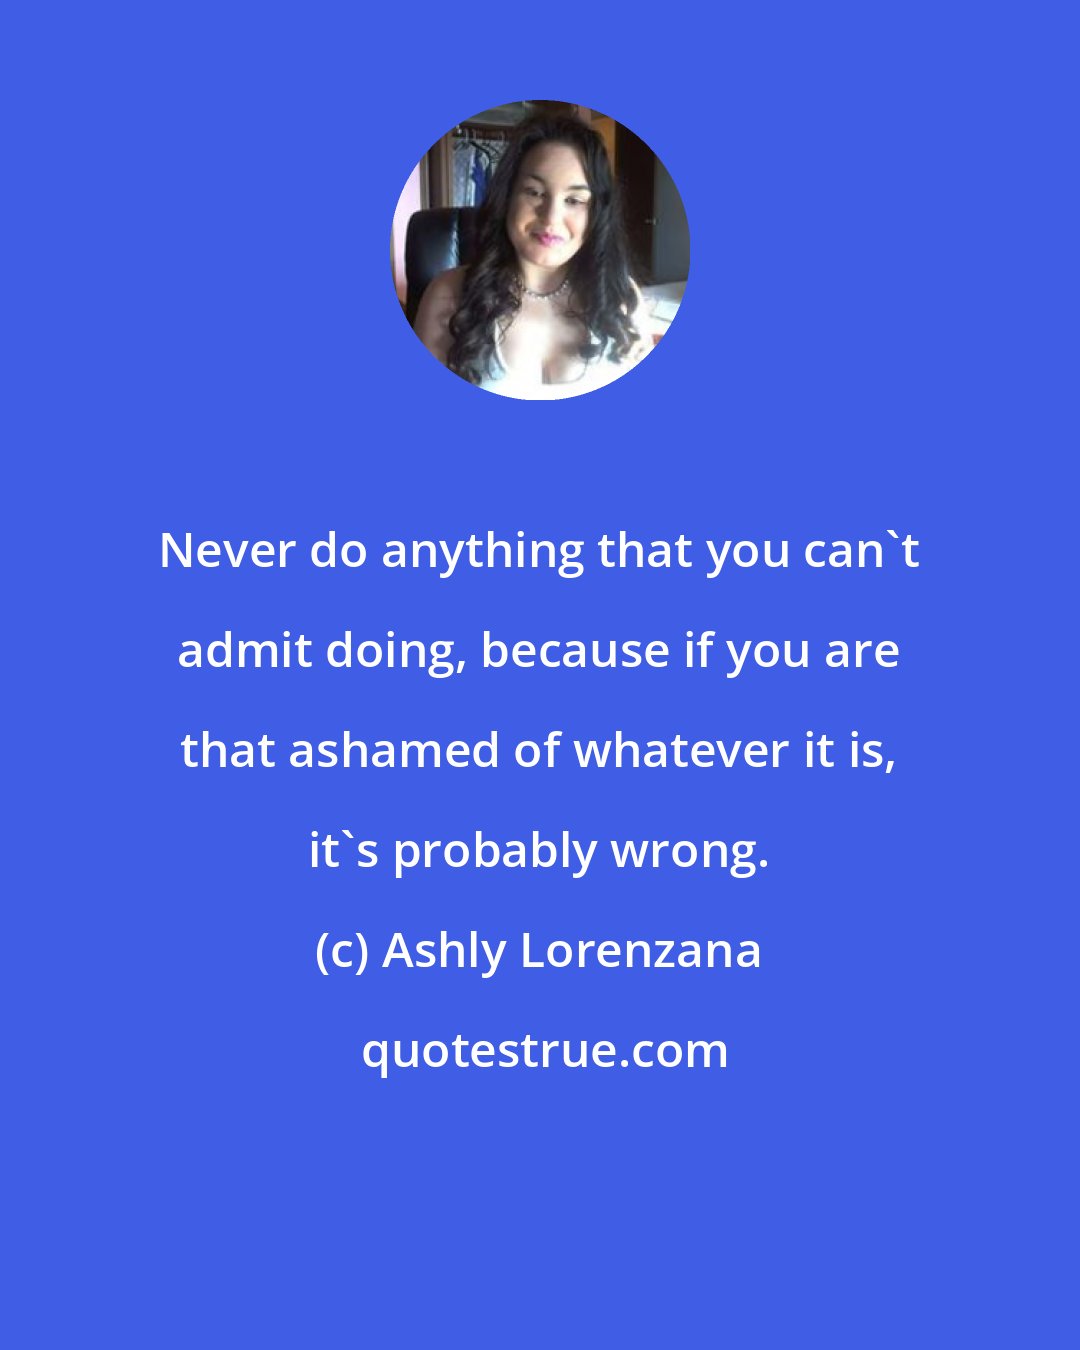 Ashly Lorenzana: Never do anything that you can't admit doing, because if you are that ashamed of whatever it is, it's probably wrong.